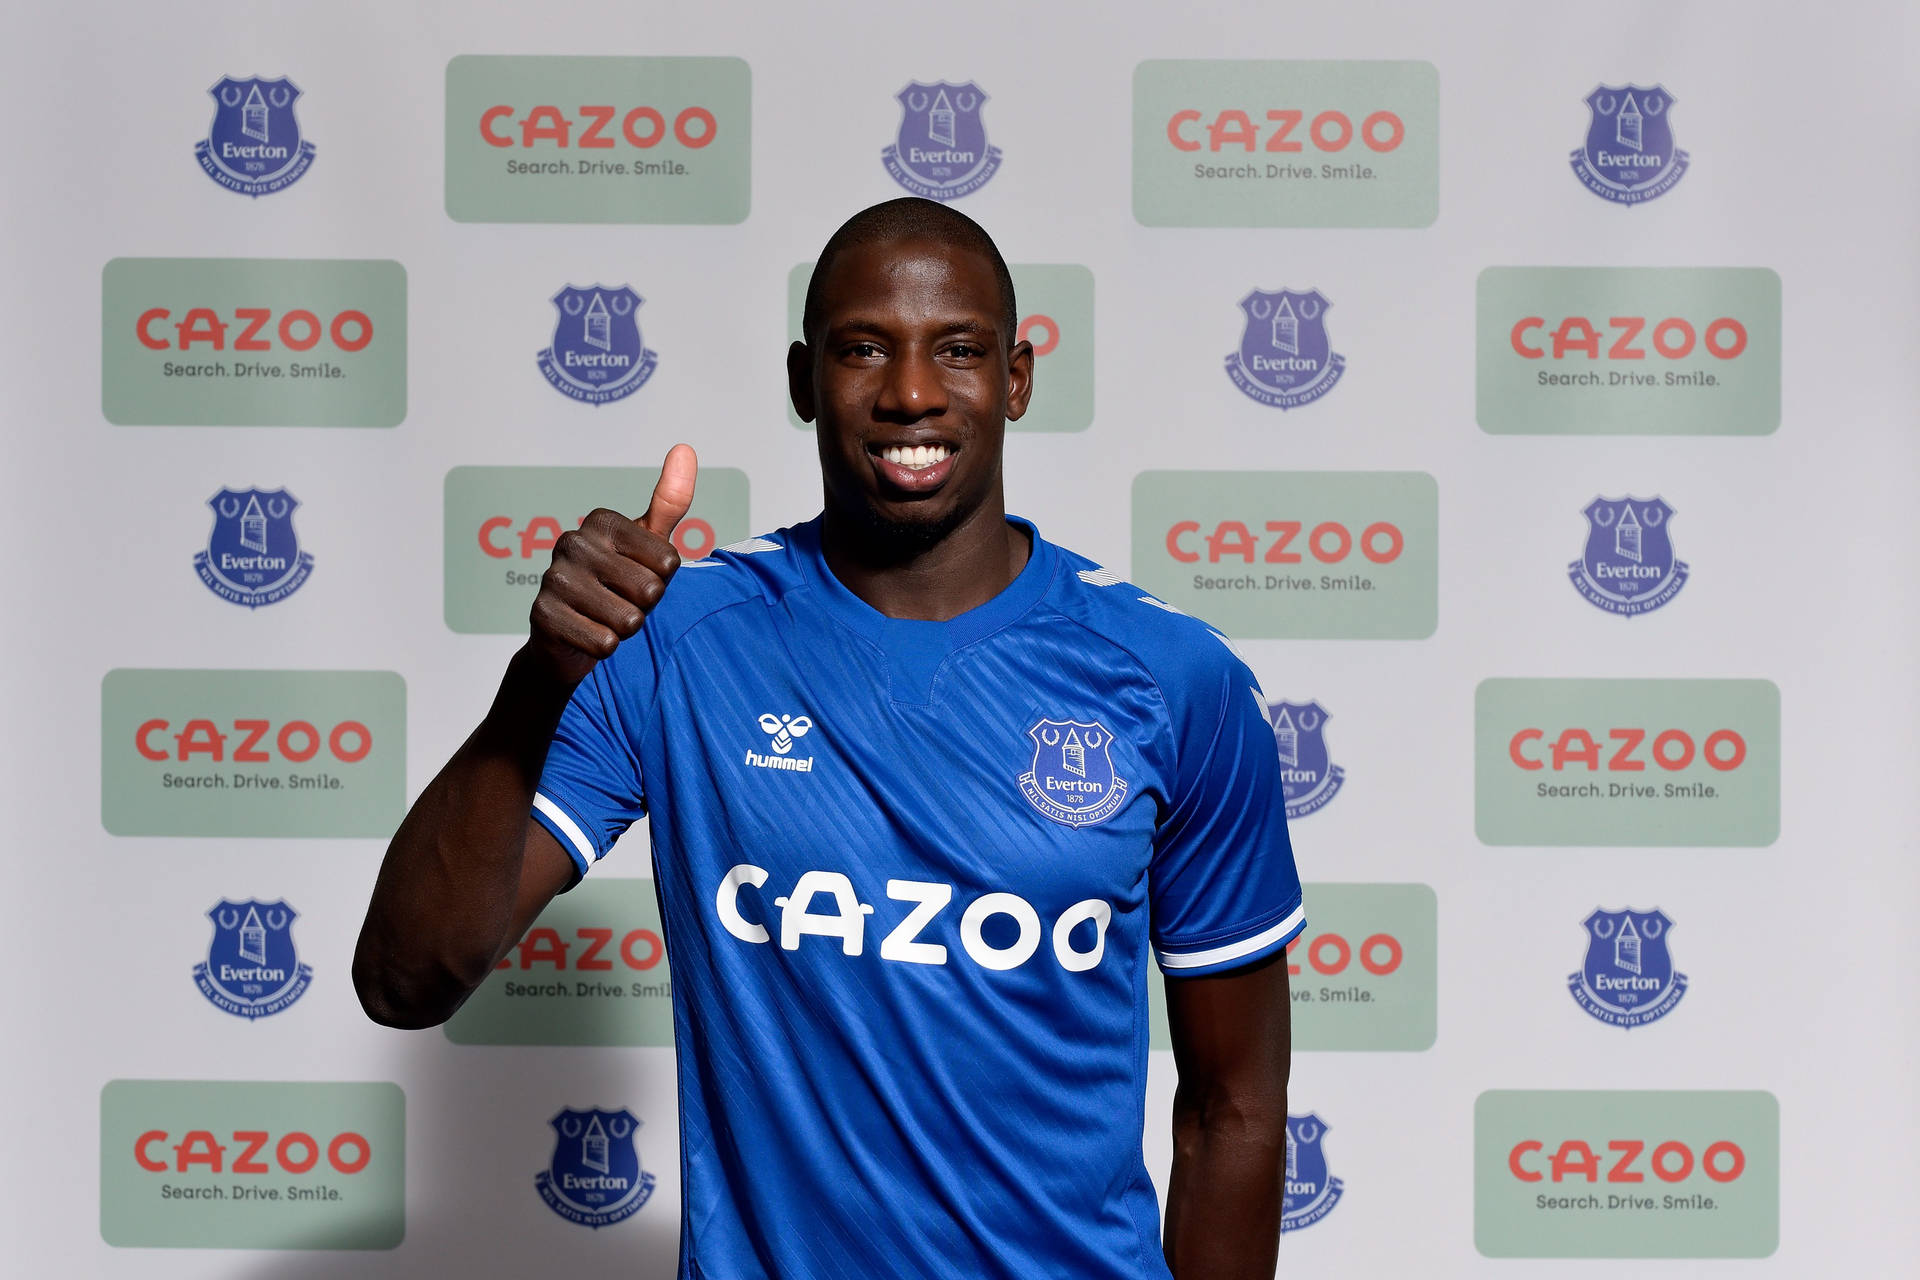 Abdoulayedoucouré Tumme Upp. (this Could Be Used As A Potential Caption For A Wallpaper Featuring A Photo Of Abdoulaye Doucouré Giving A Thumbs Up.) Wallpaper